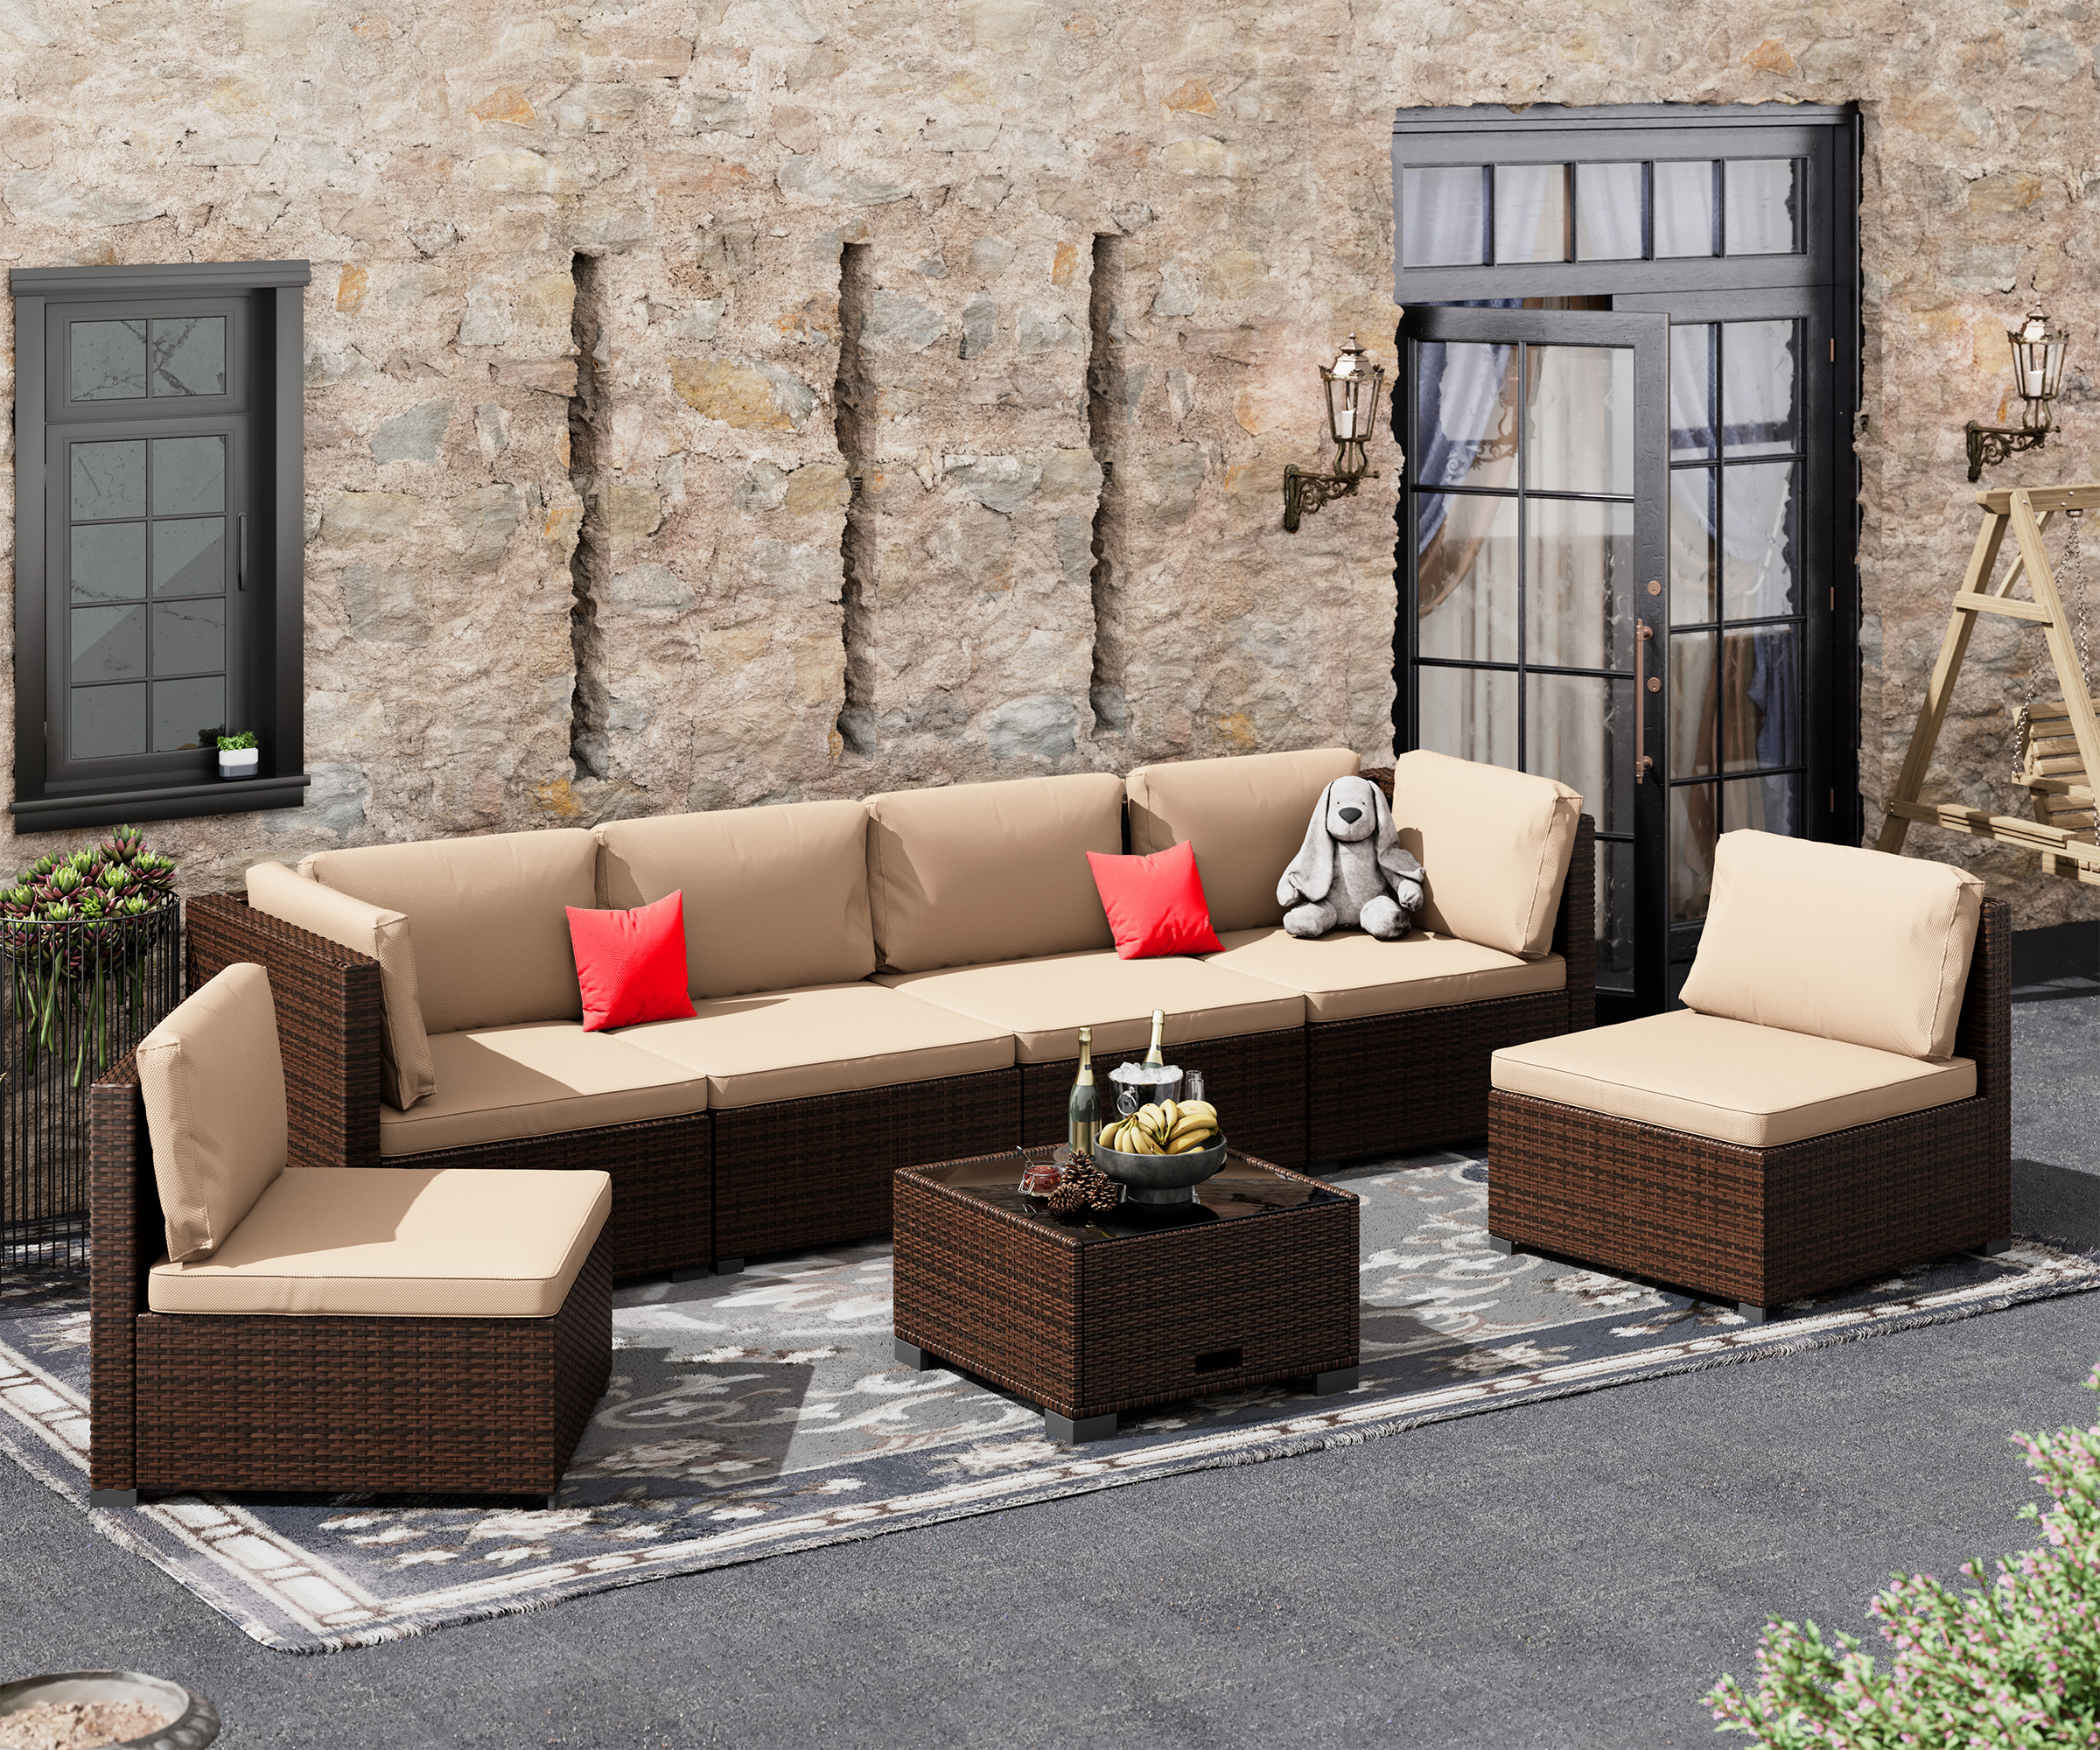 7 Piece Patio Furniture Set, Outdoor Furniture Patio Sectional Sofa, All Weather PE Rattan Outdoor Sectional with Cushion and Coffee Table. - image 2 of 6